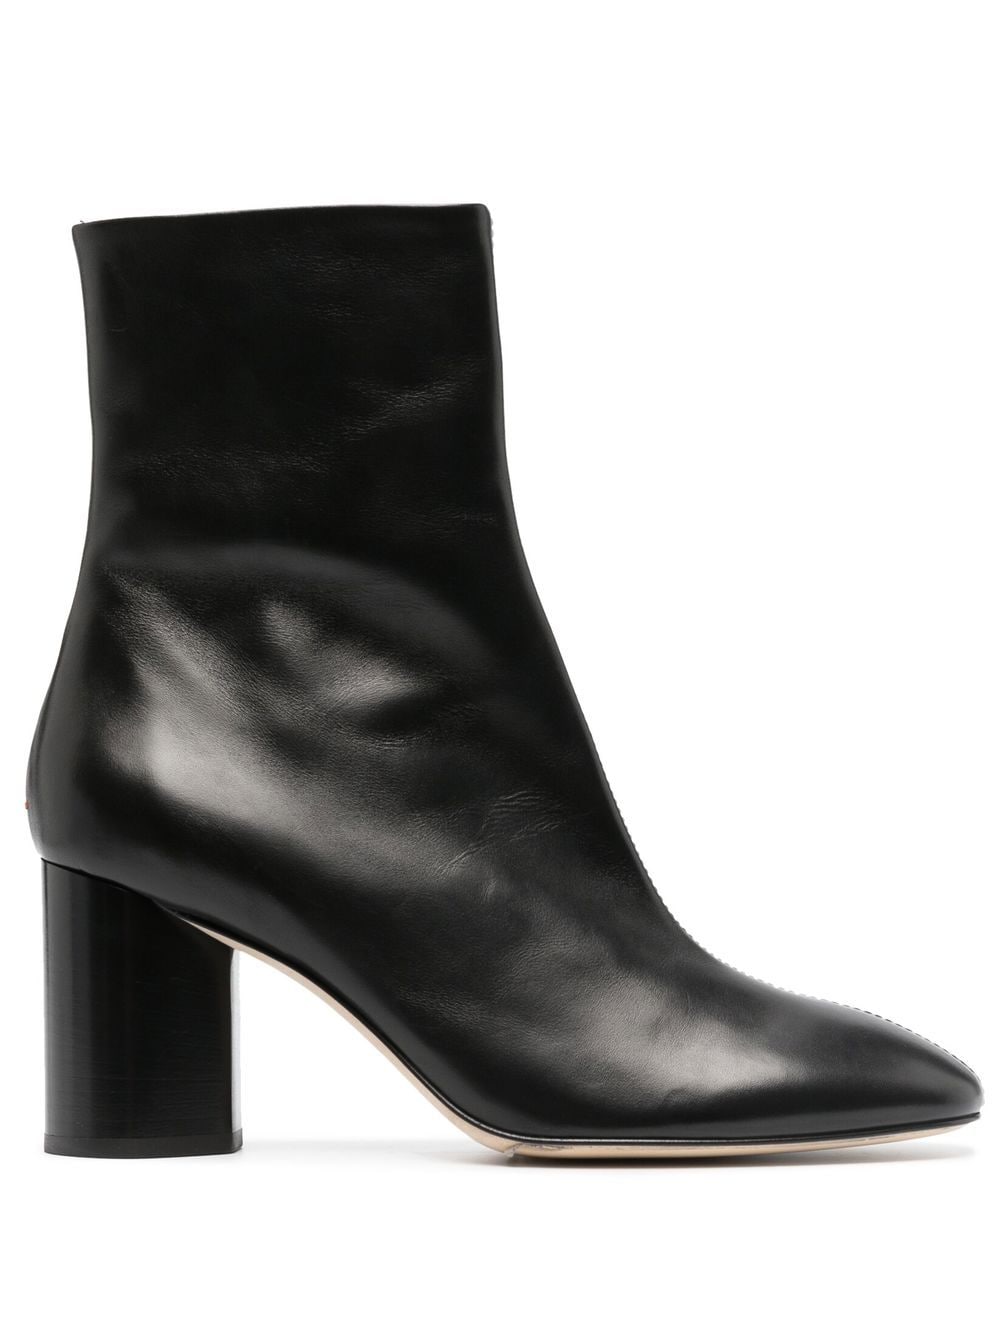 Aeyde Alena leather ankle boots - Black von Aeyde